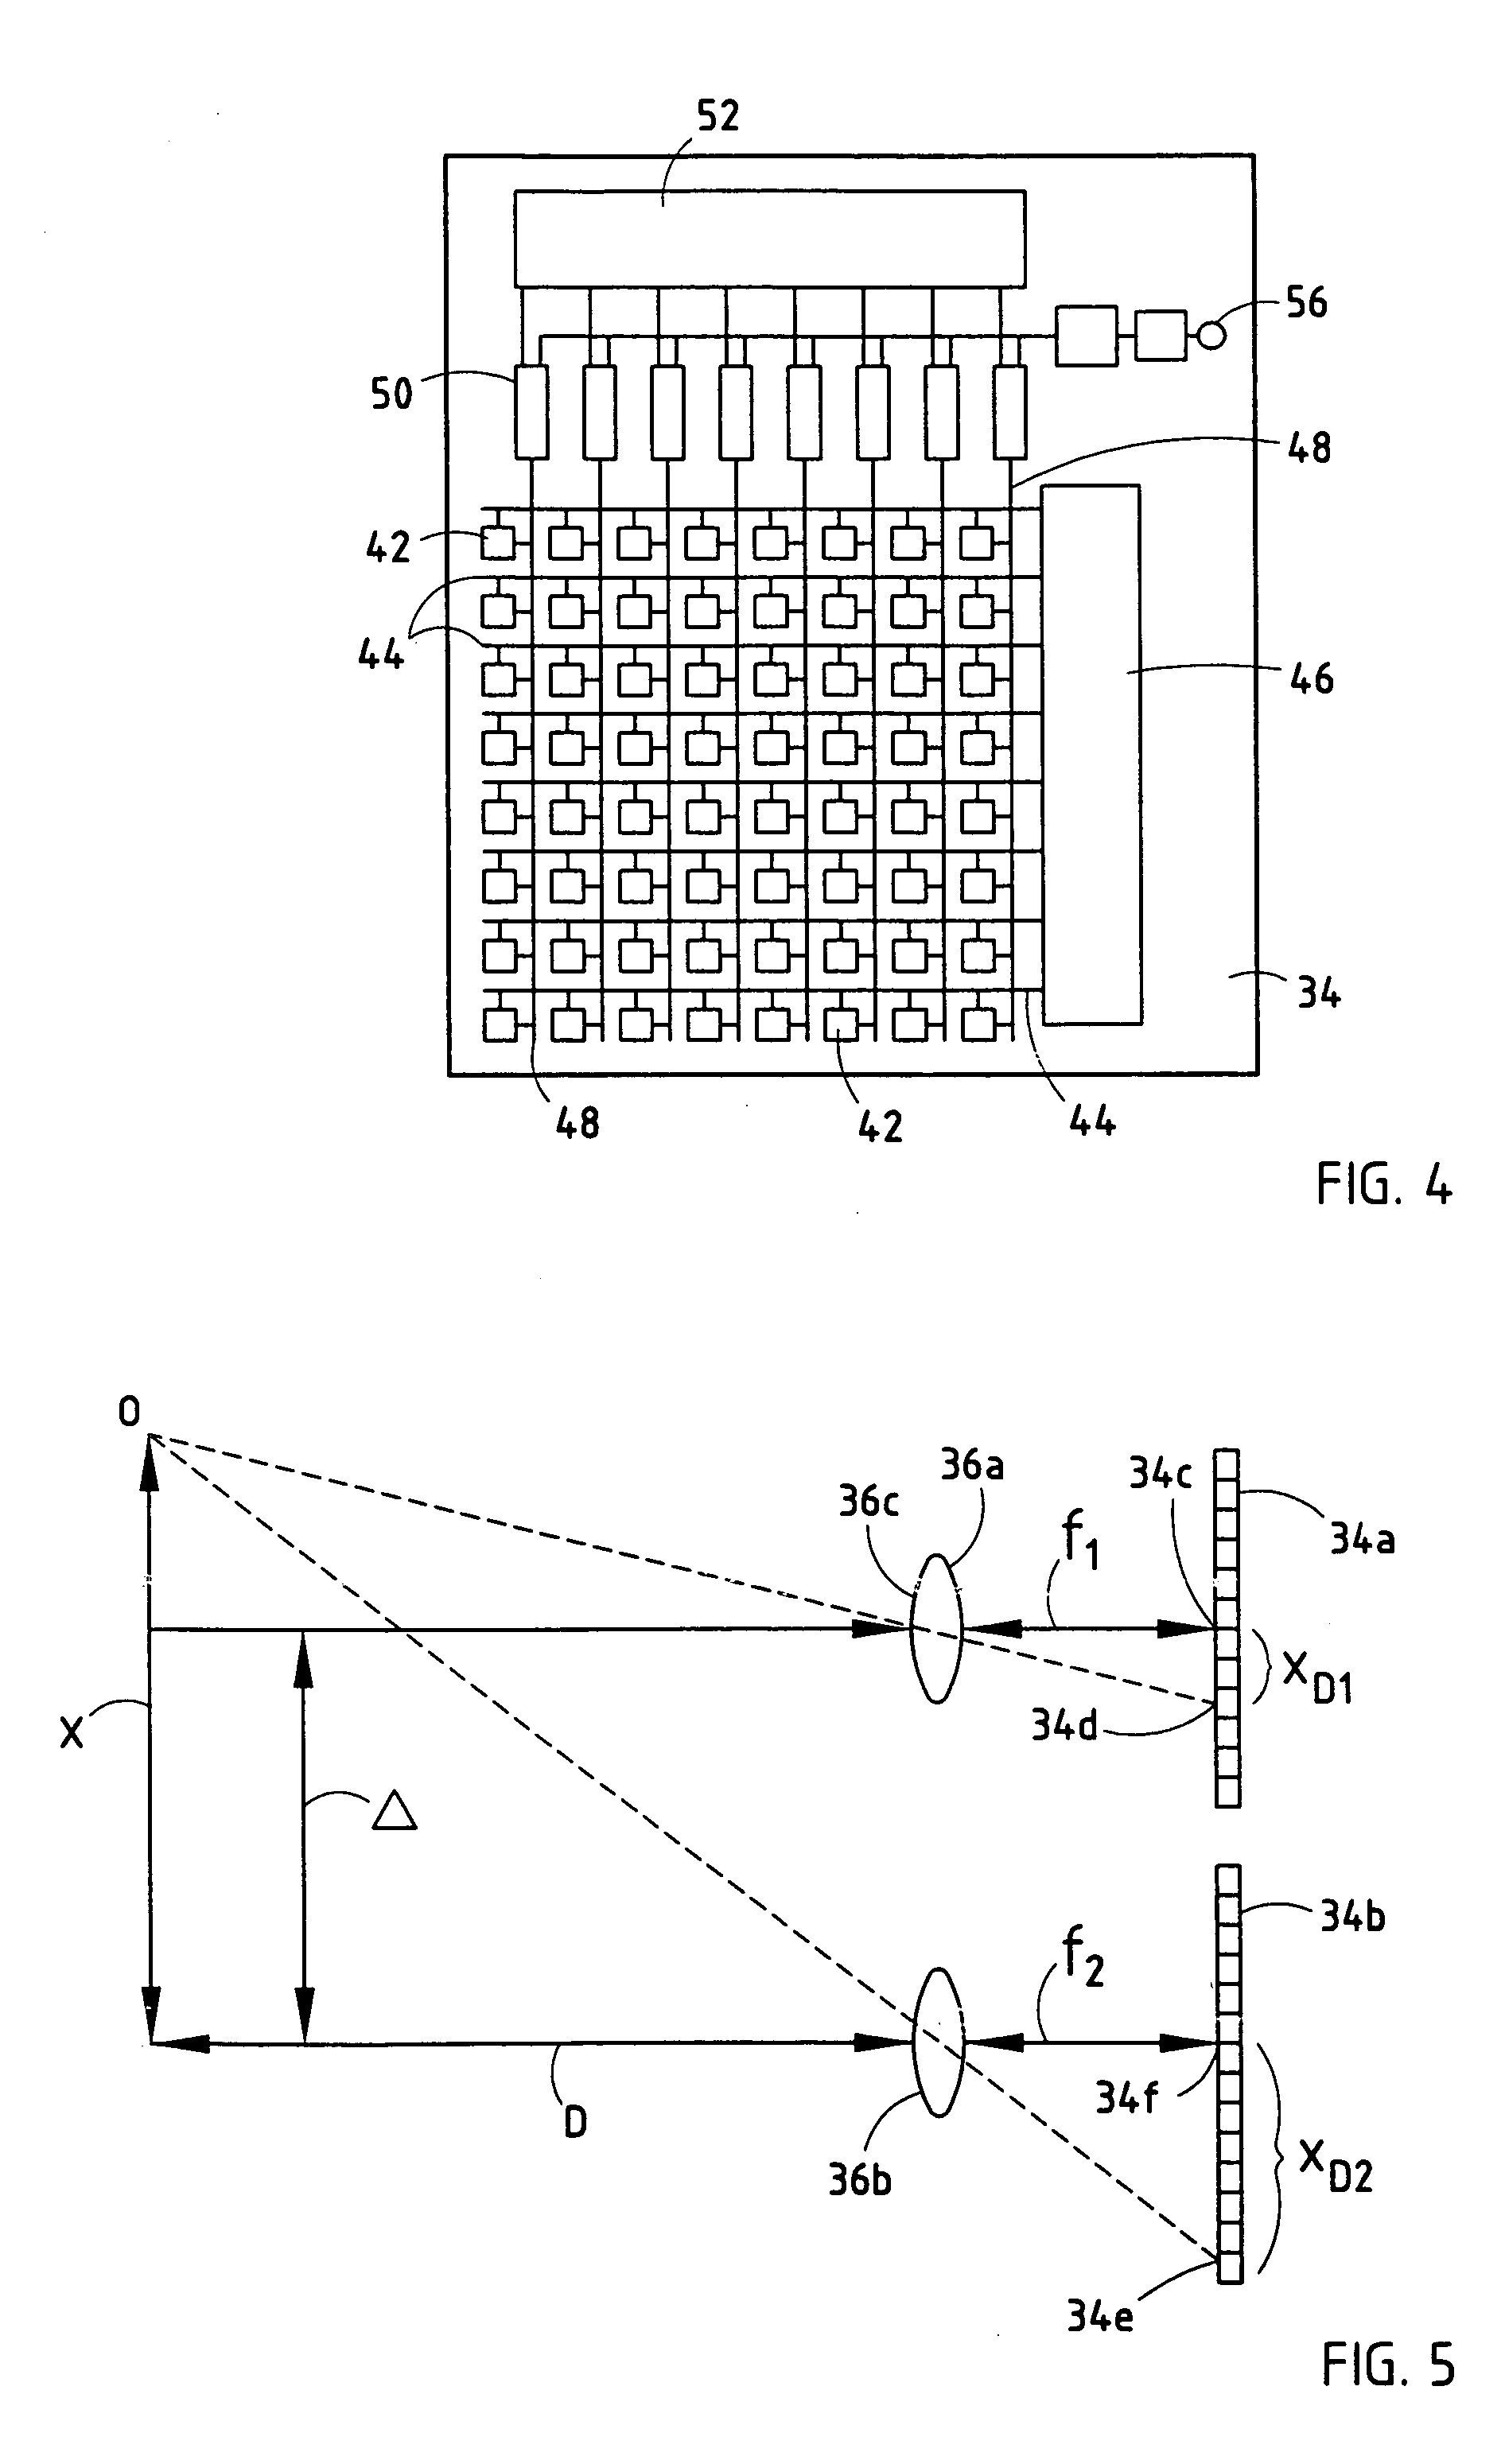 Vehicle imaging system